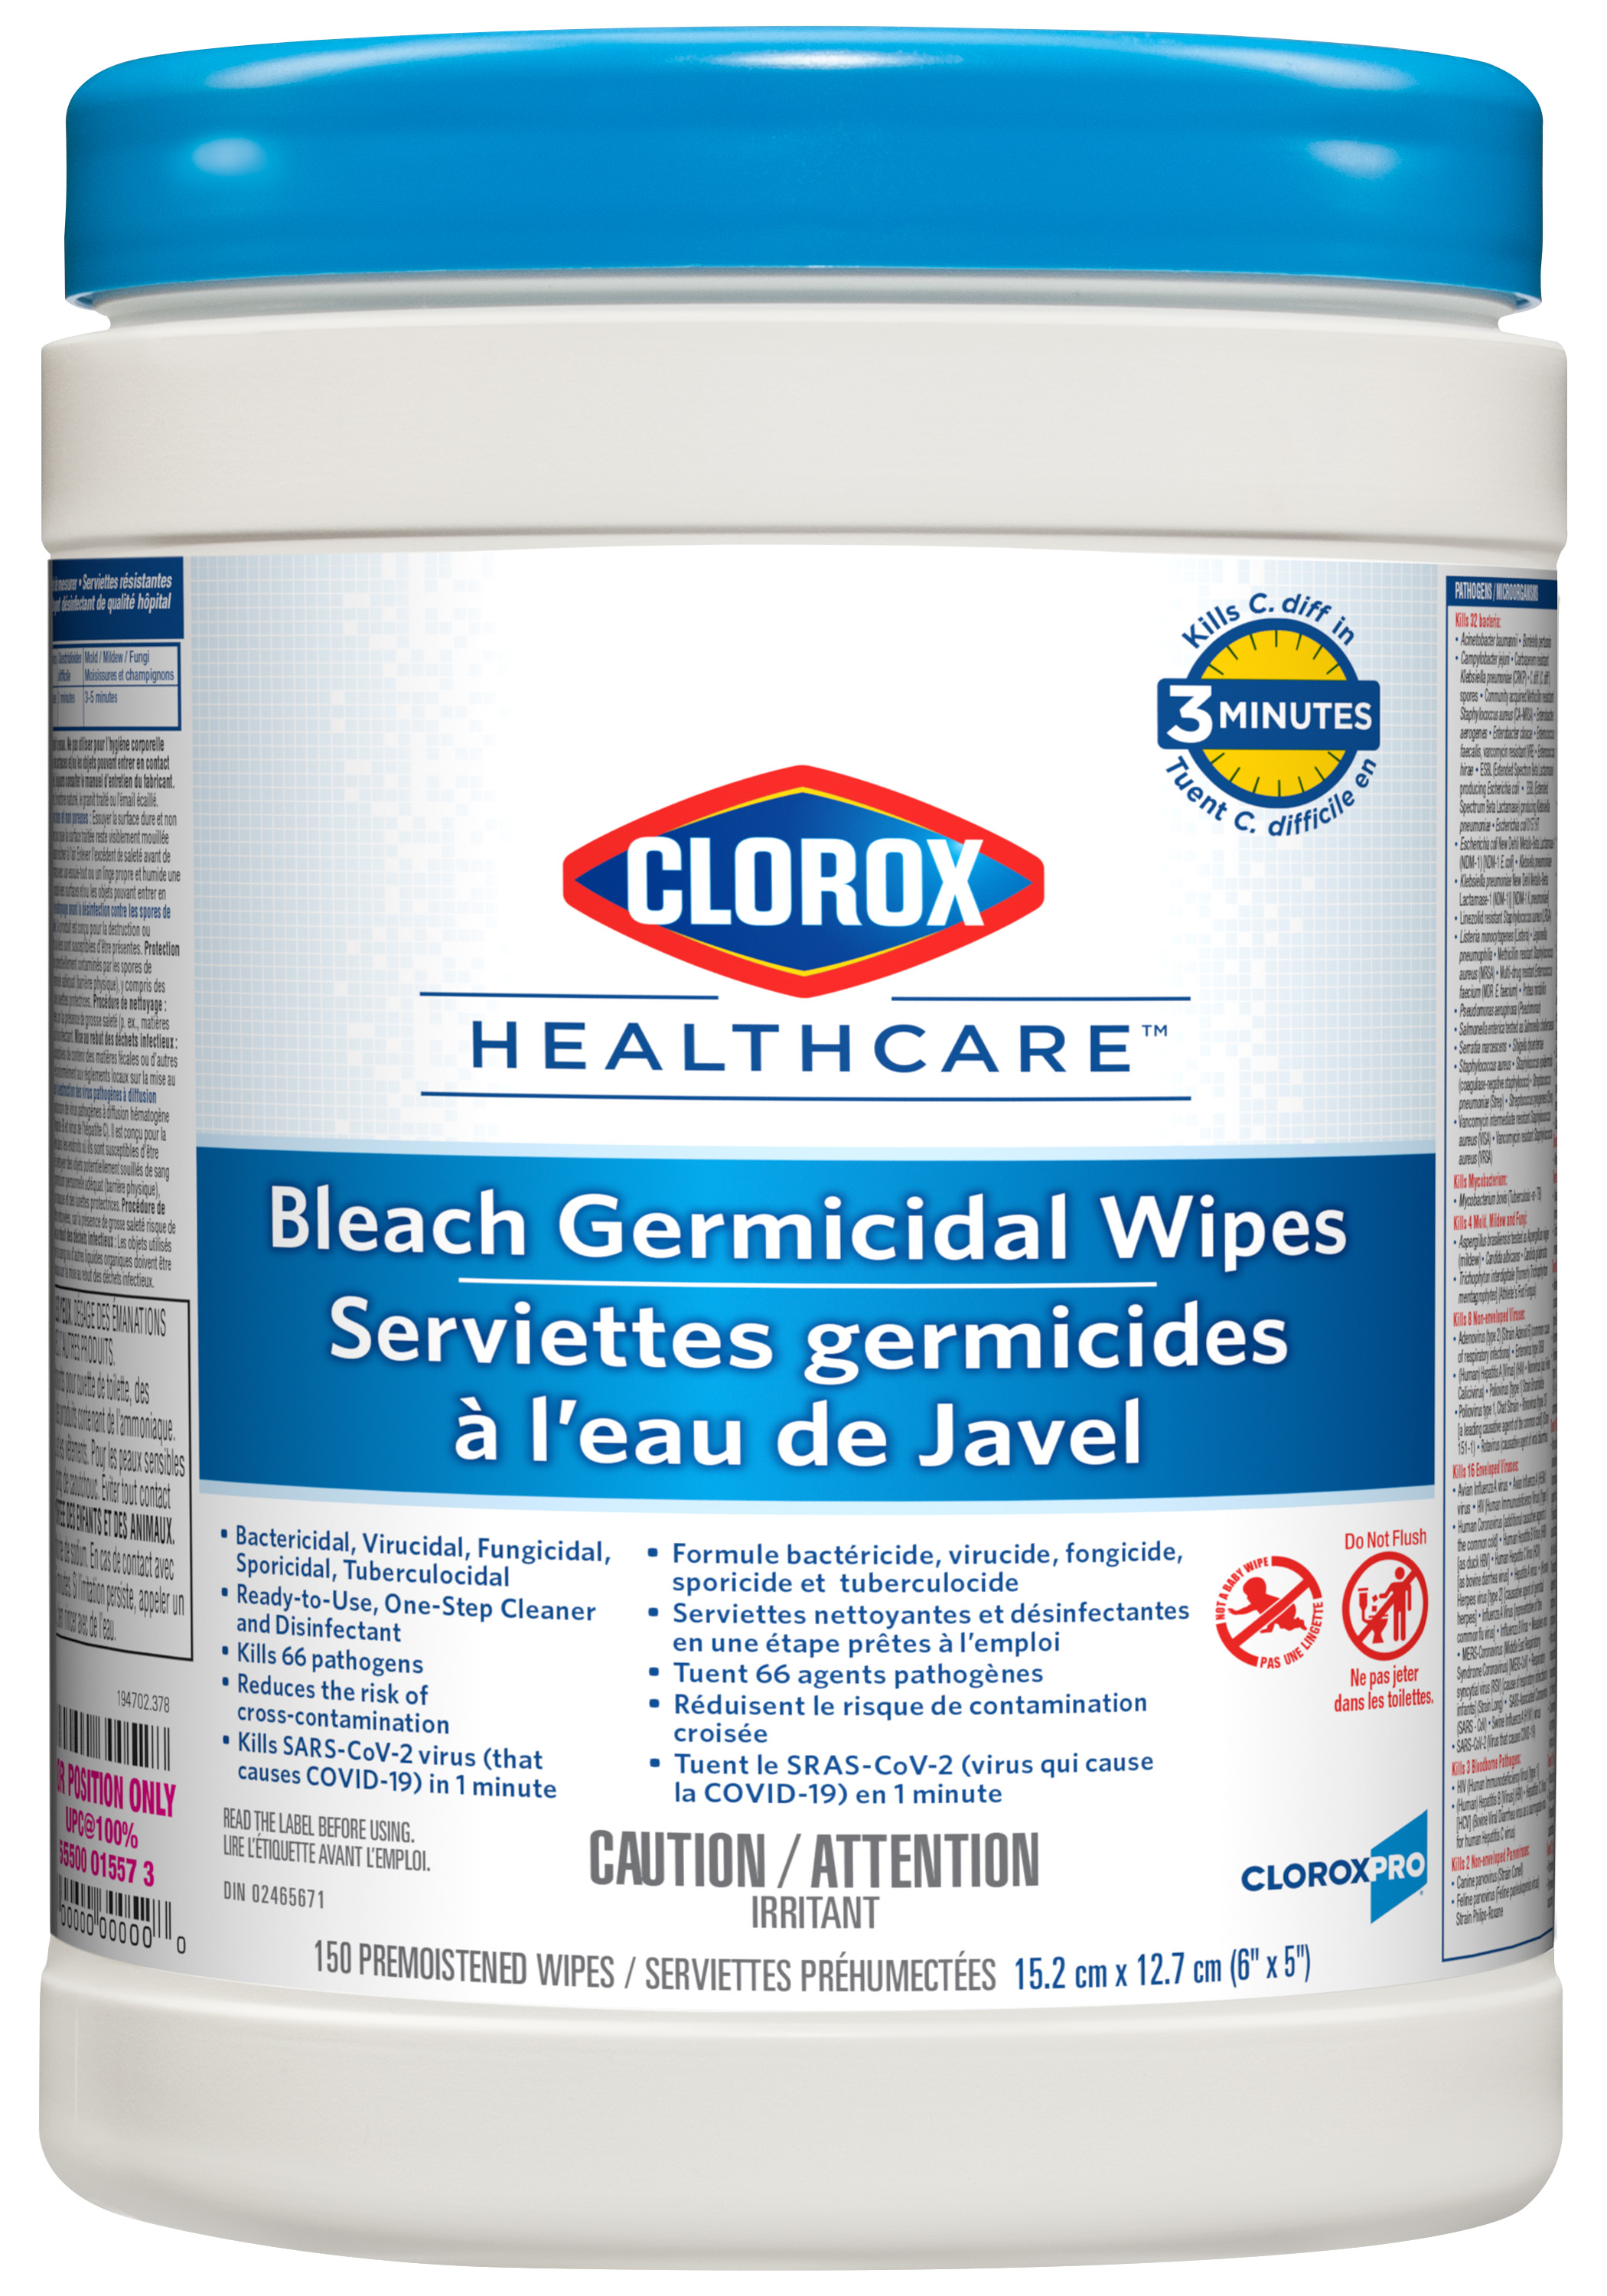 Clorox Bleach Wipes 150 Count canister showing the front label